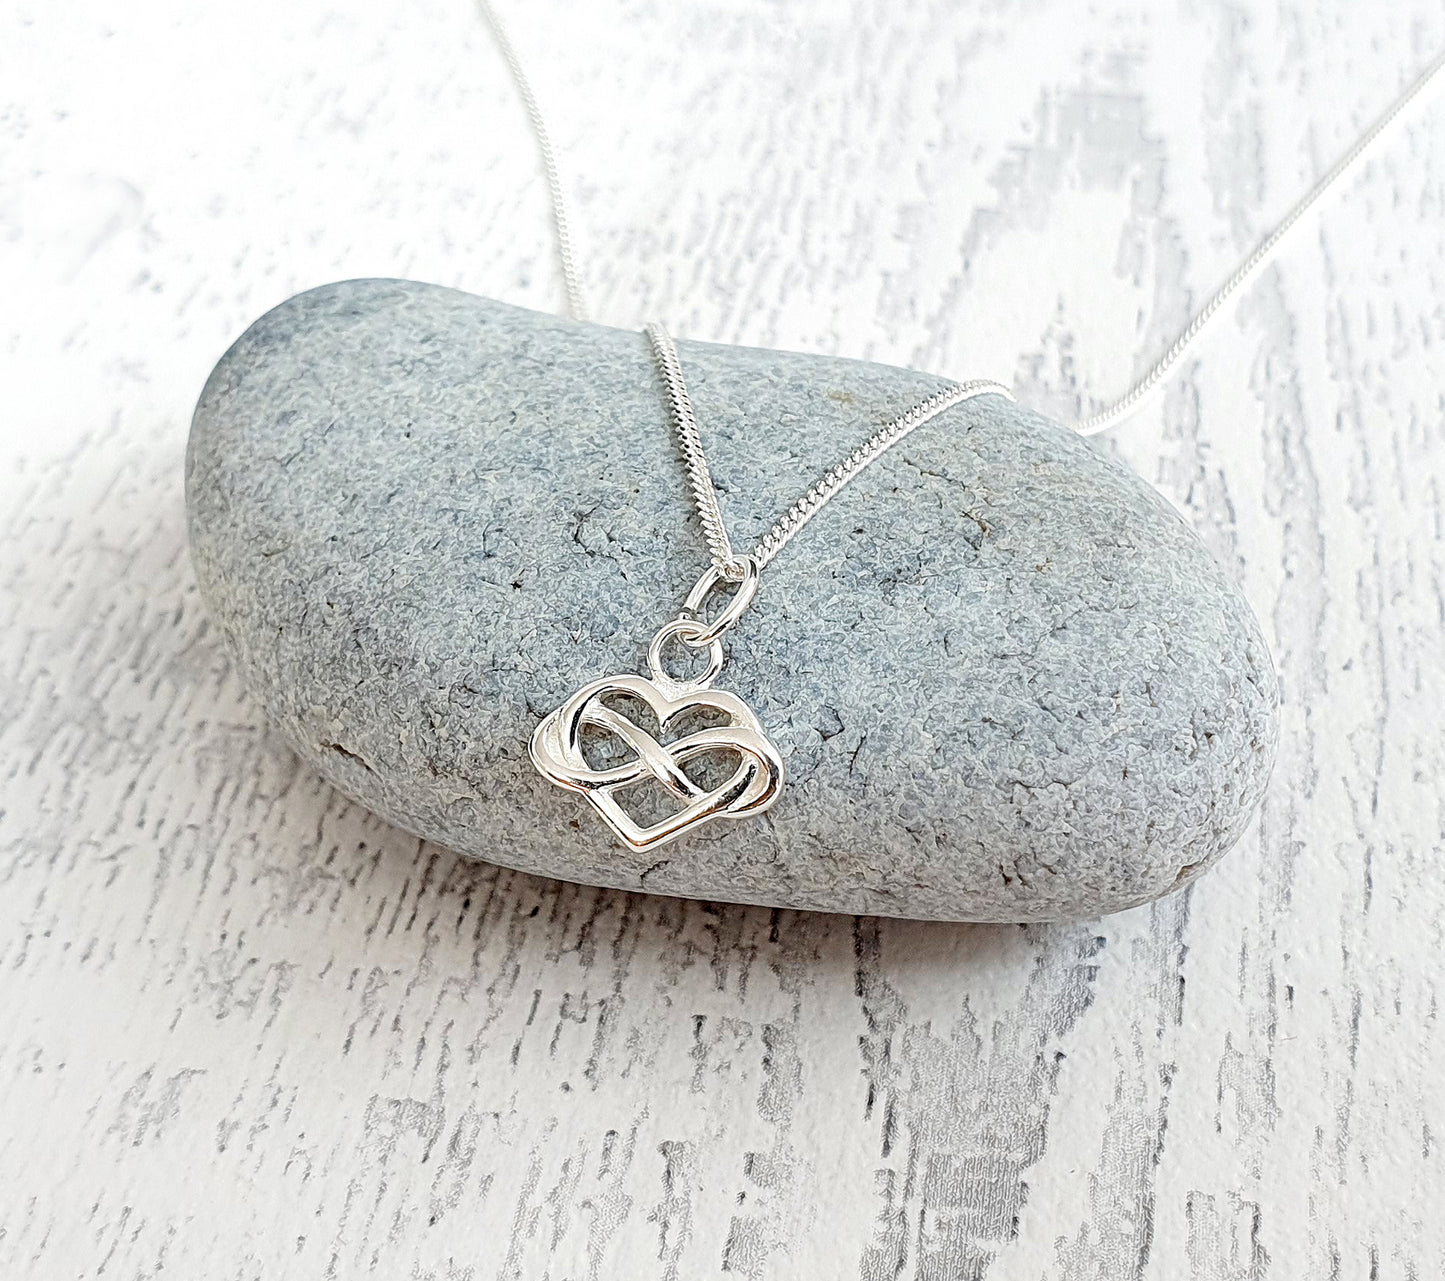 Graduation Infinity Heart Necklace in Sterling Silver 925, Personalised Gift